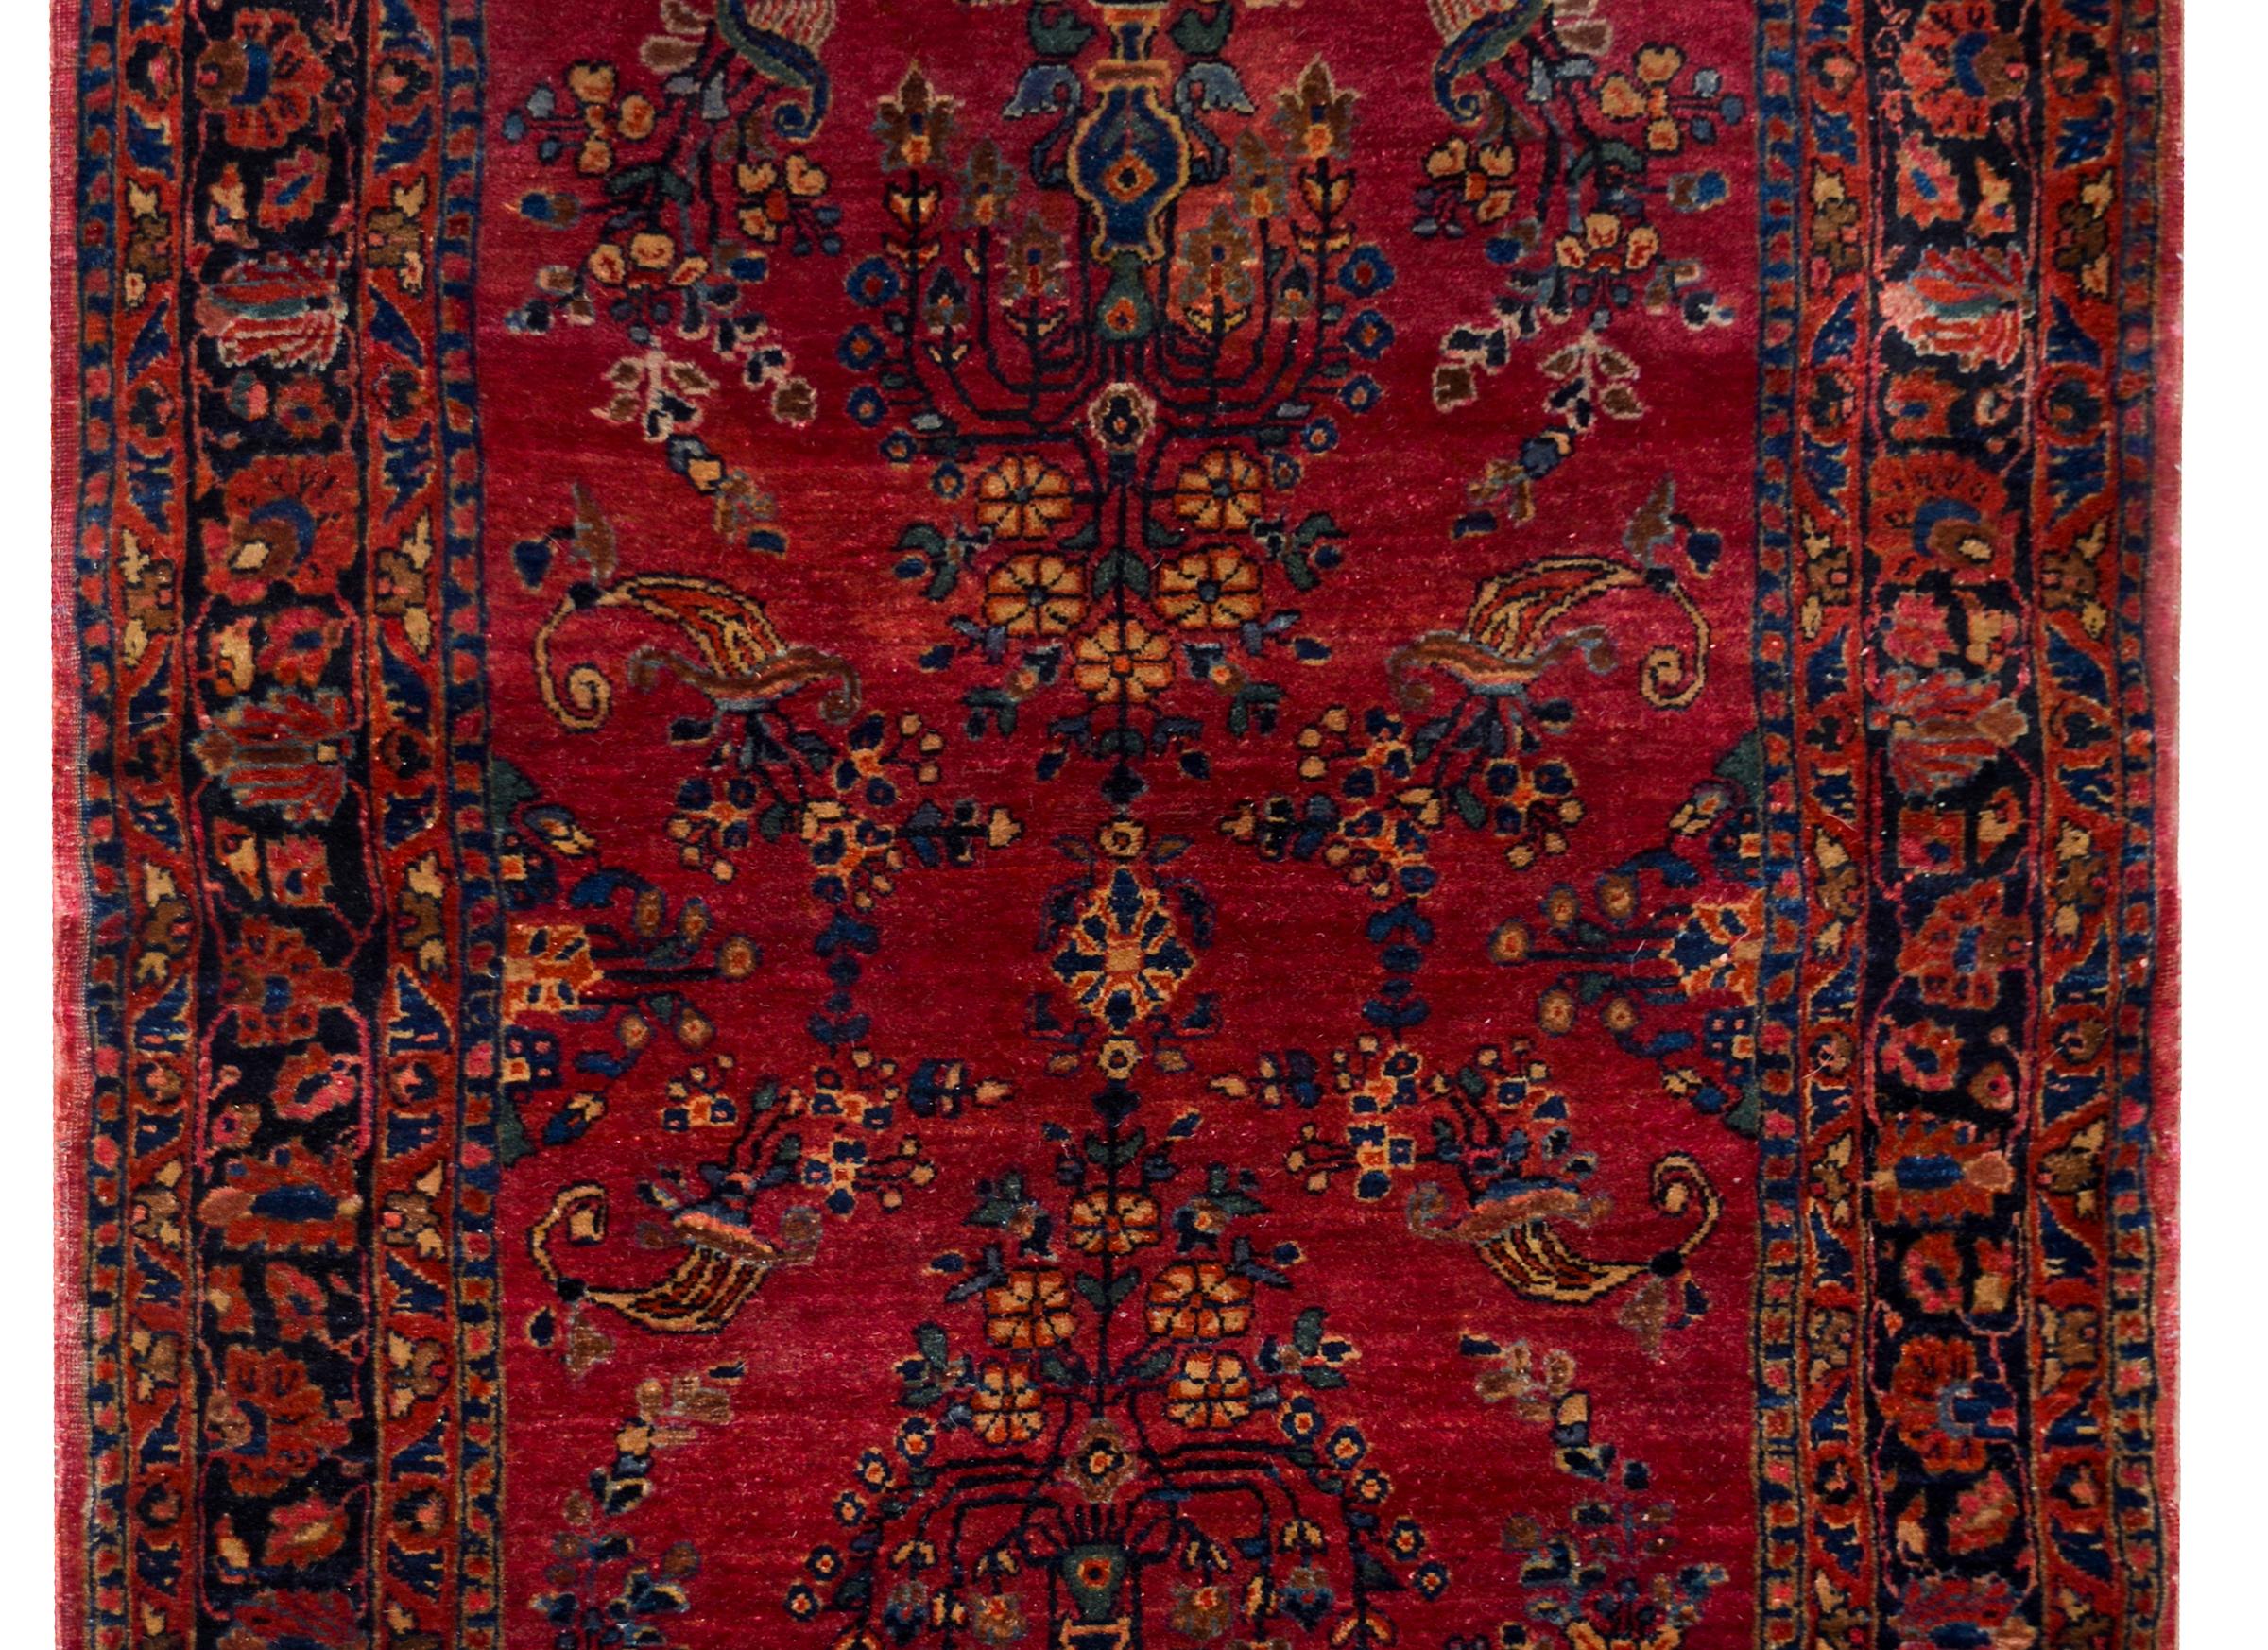 A beautiful early 20th century Persian Sarouk Mohajeran rug with a mirrored tree-of-life pattern woven in indigo, cream, and pink, against a dark cranberry background, and surrounded by a wide floral and scrolling vine patterned border.